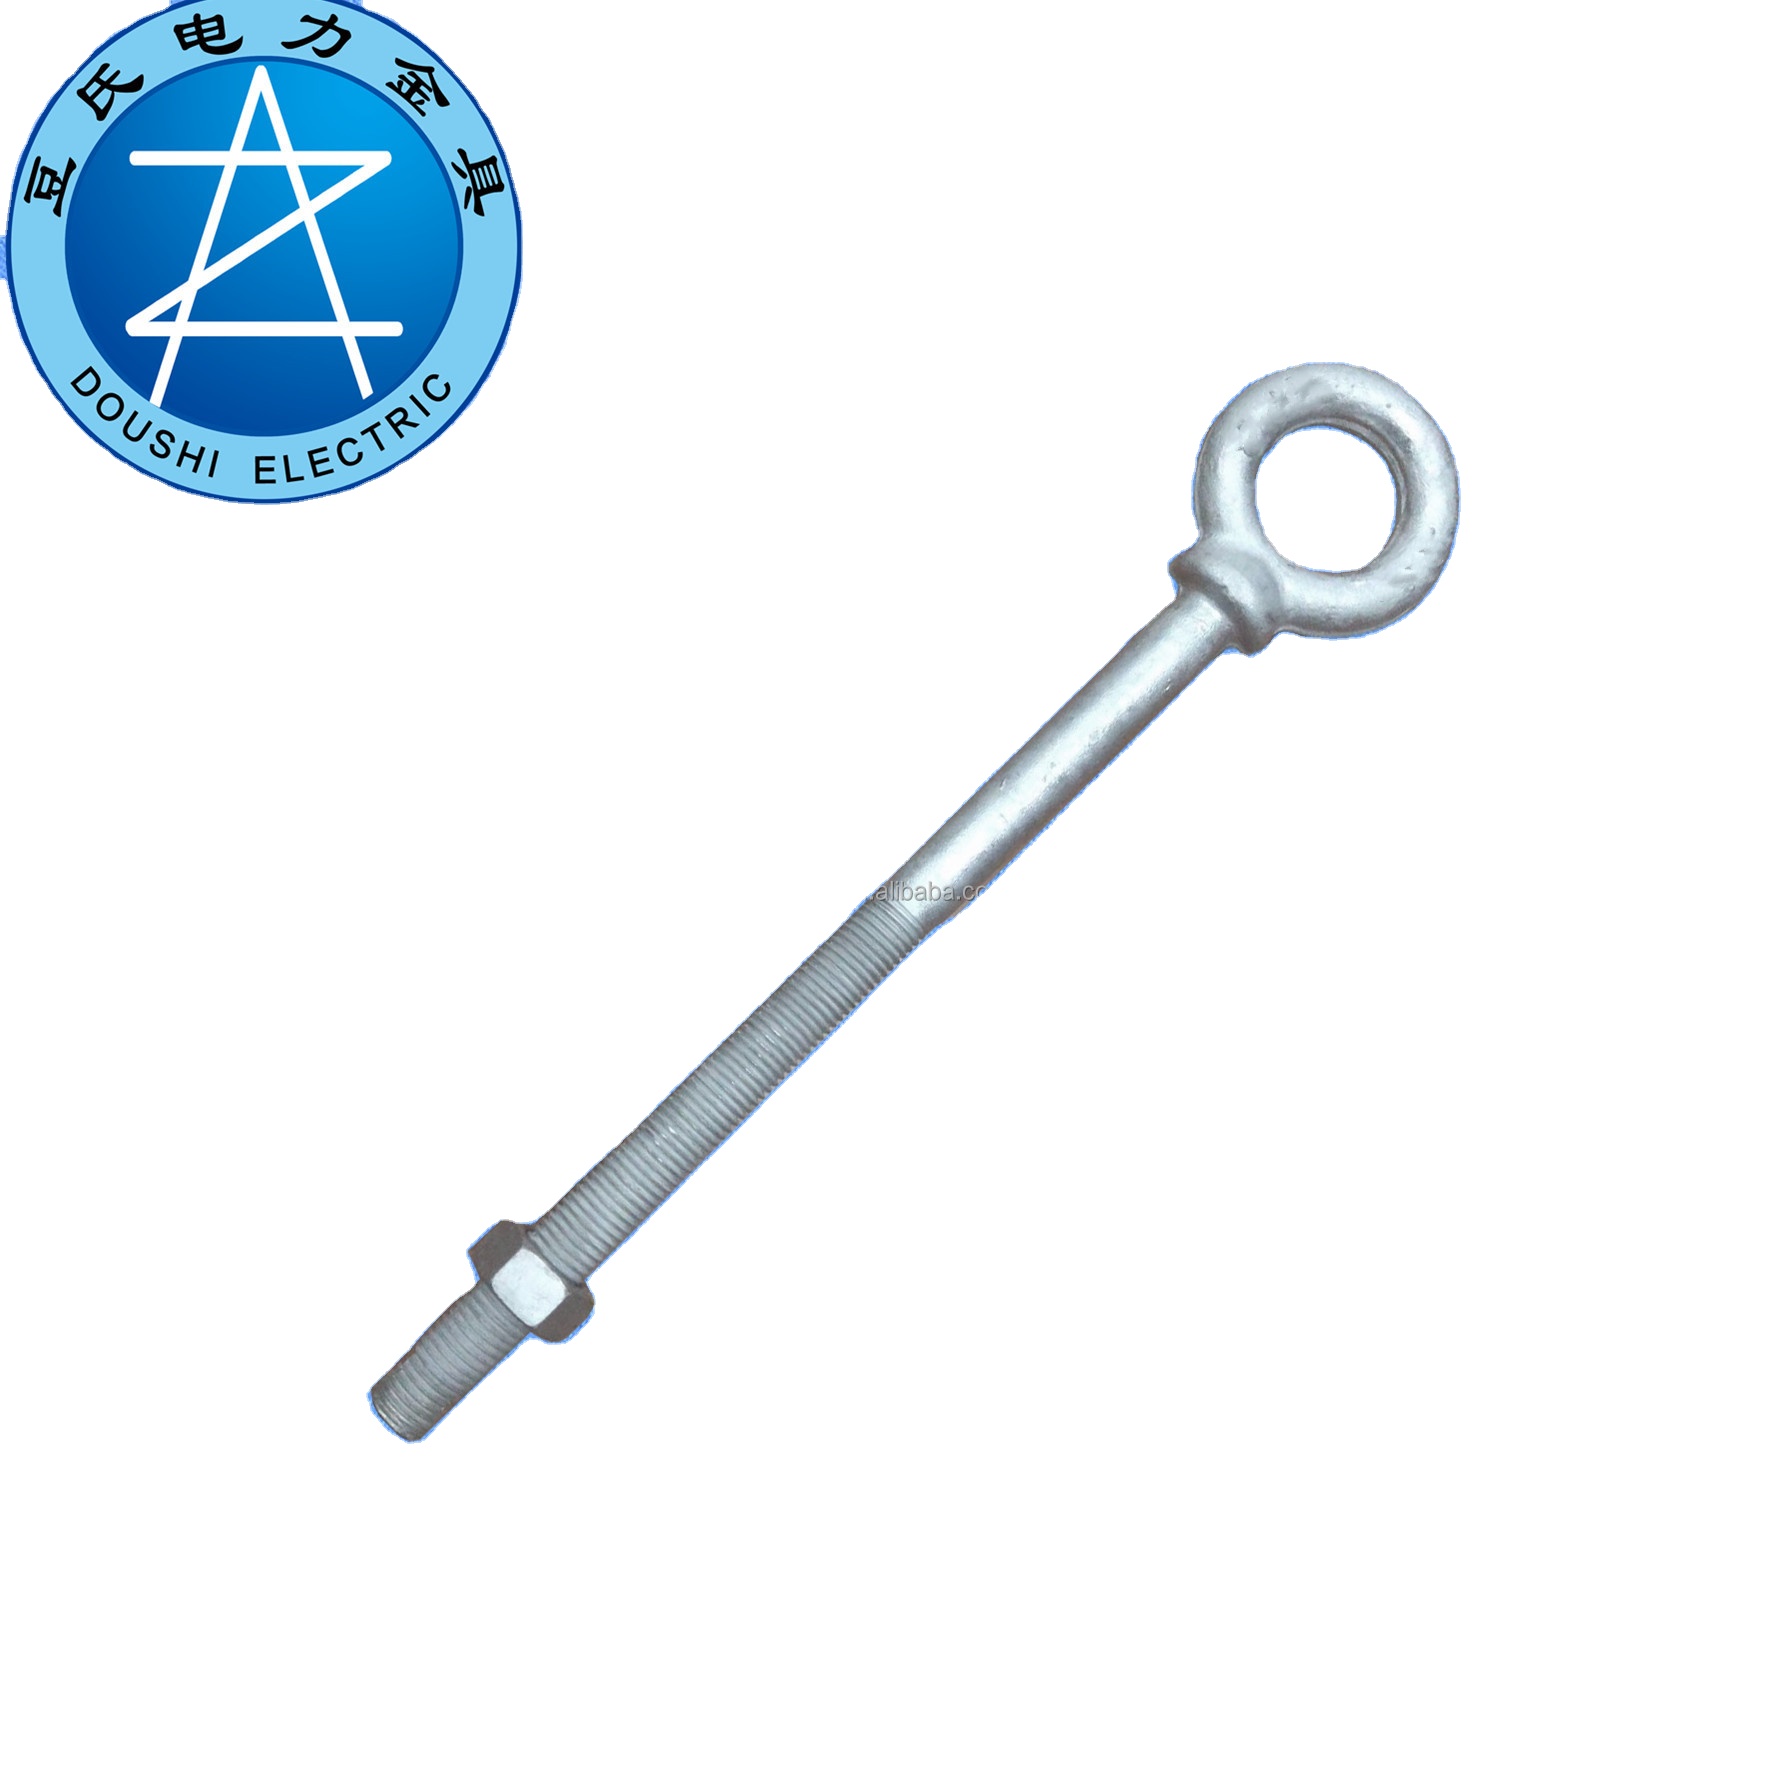 Hot Dip Galvanized Forged Eye Bolts din 580  for cable rope lifting open  loop  lag drop eye bolt